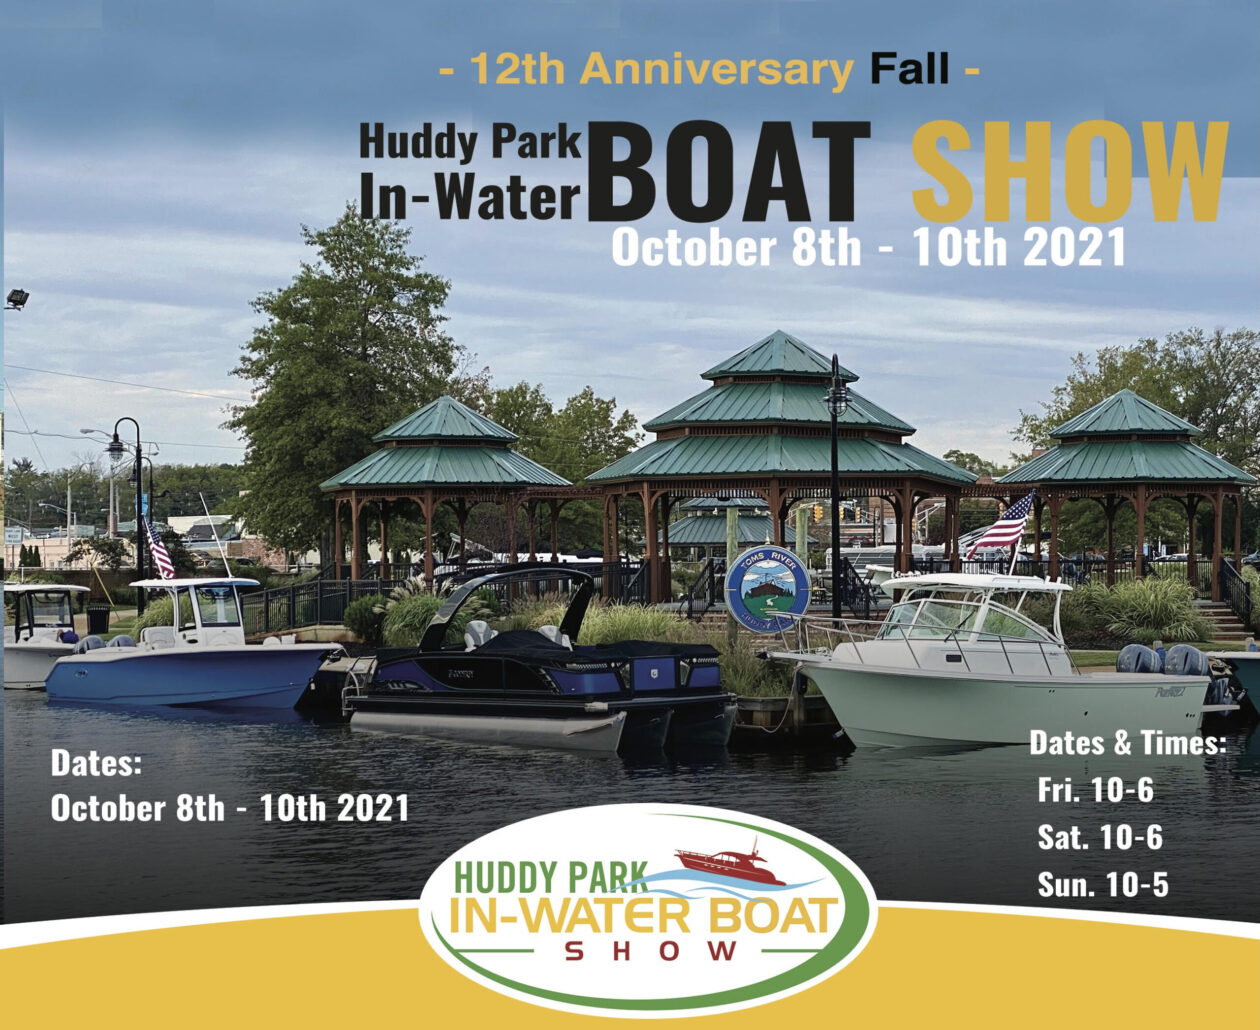 Huddy Park In-Water Boat Show